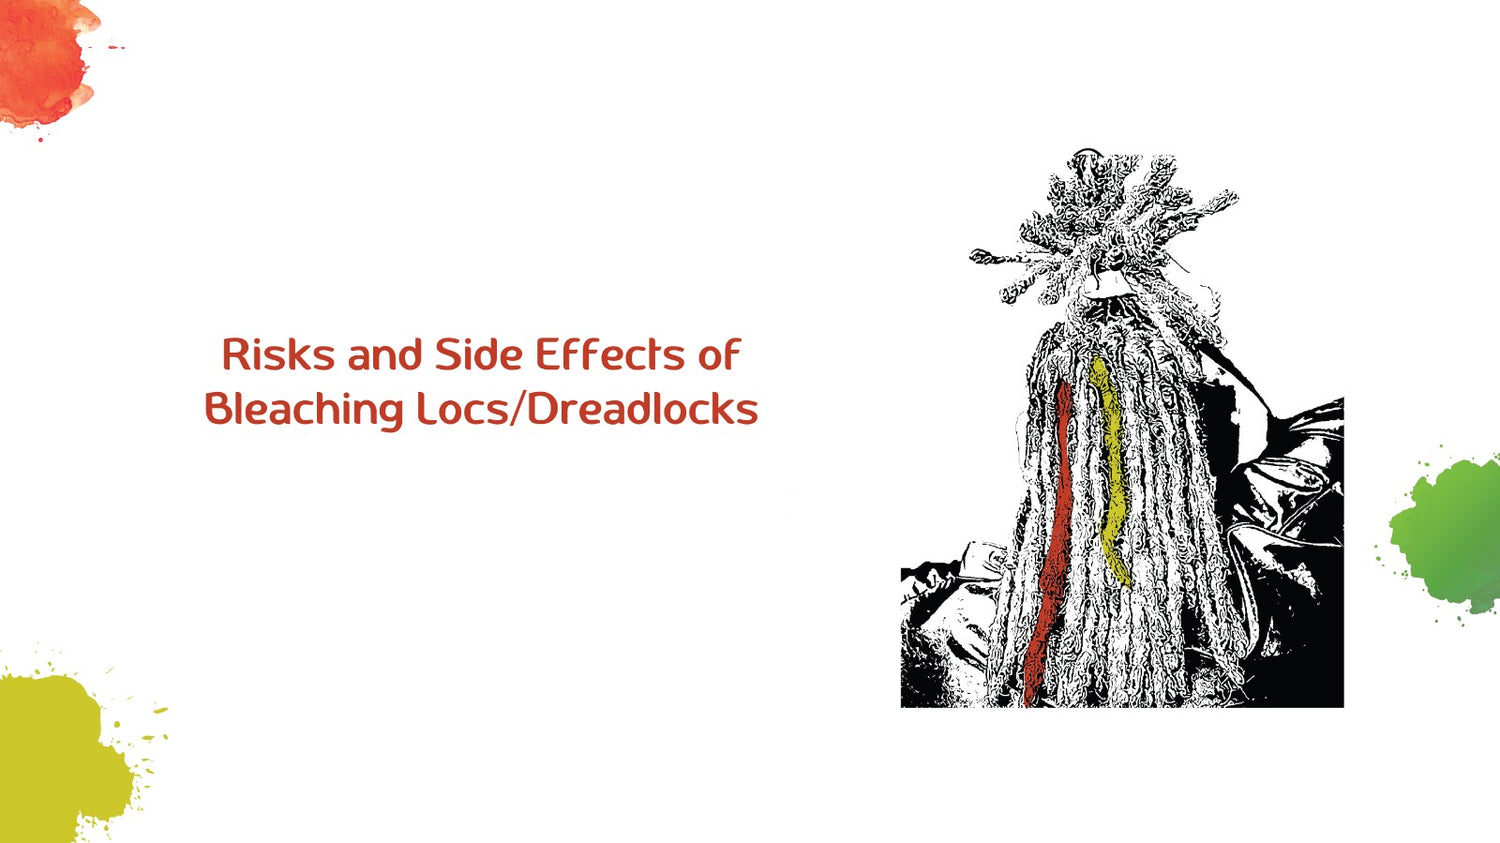 Risks and Side Effects of Bleaching Locs/Dreadlocks